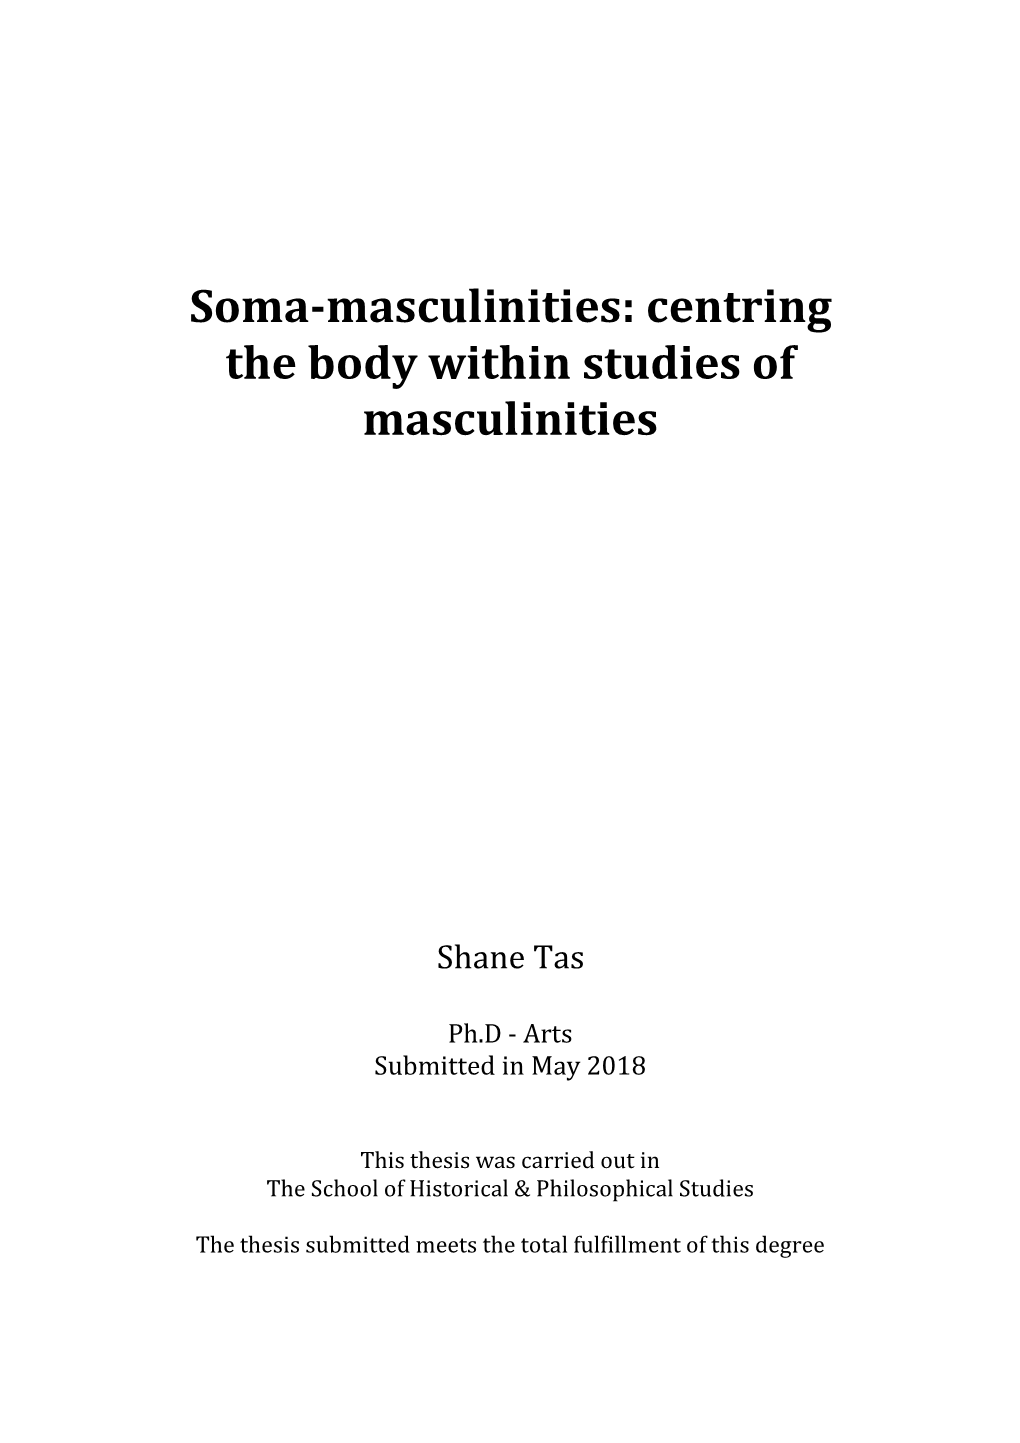 Soma-Masculinities: Centring the Body Within Studies of Masculinities